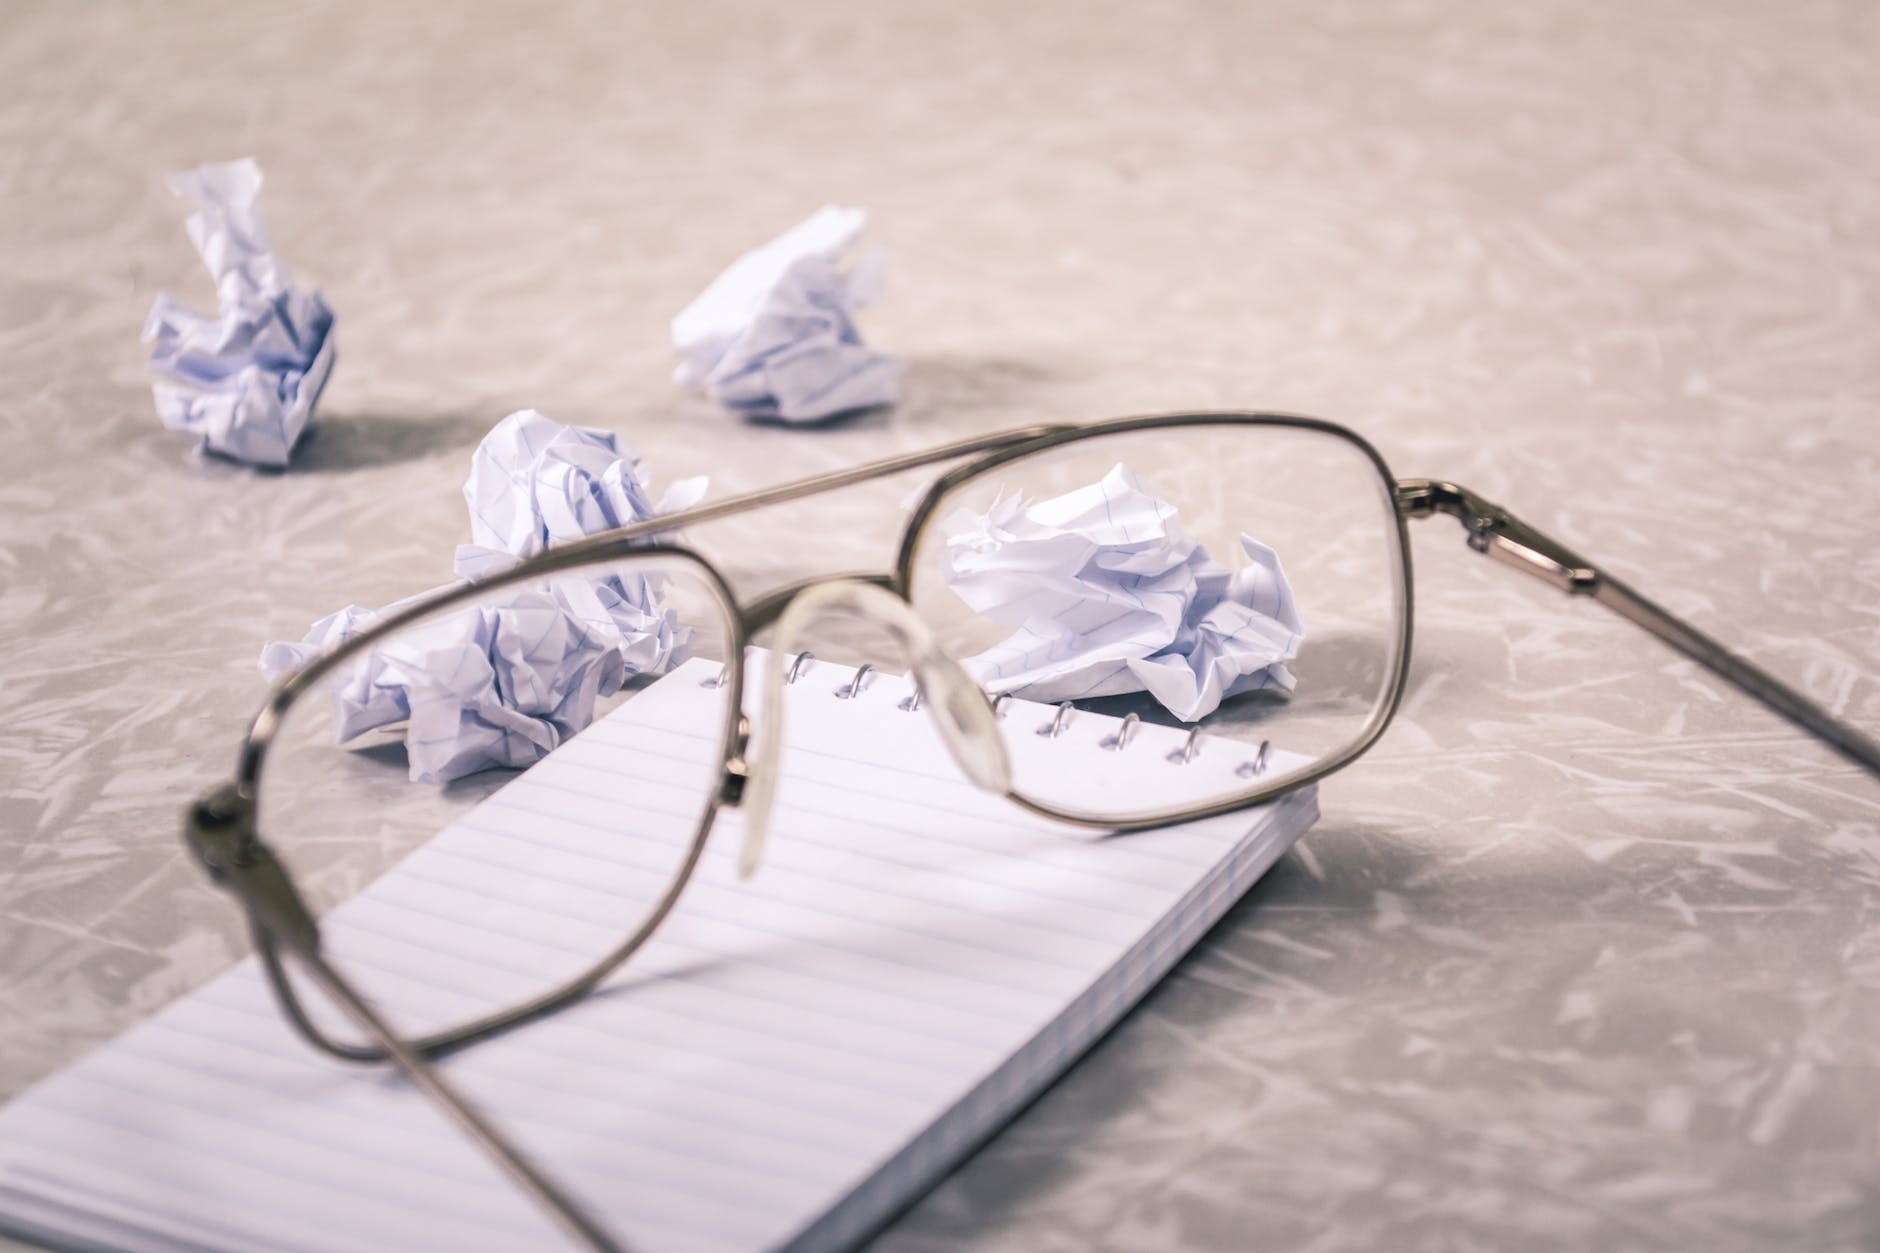 close up photography of eyeglasses near crumpled papers